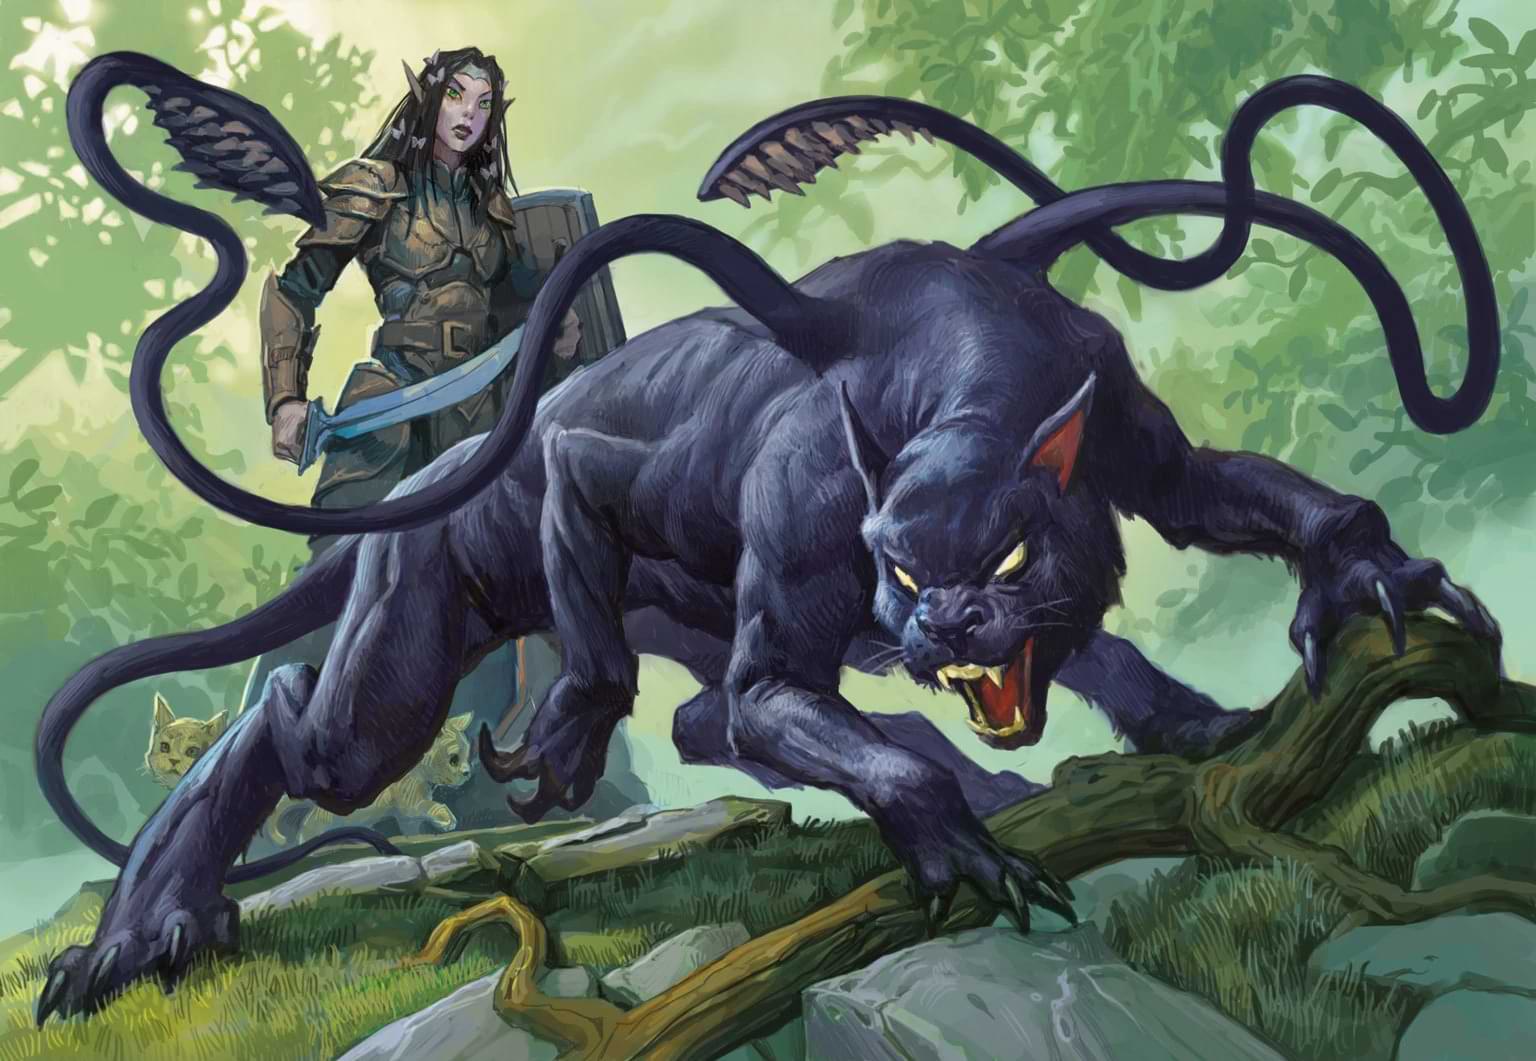 A displacer beast with its ranger companion